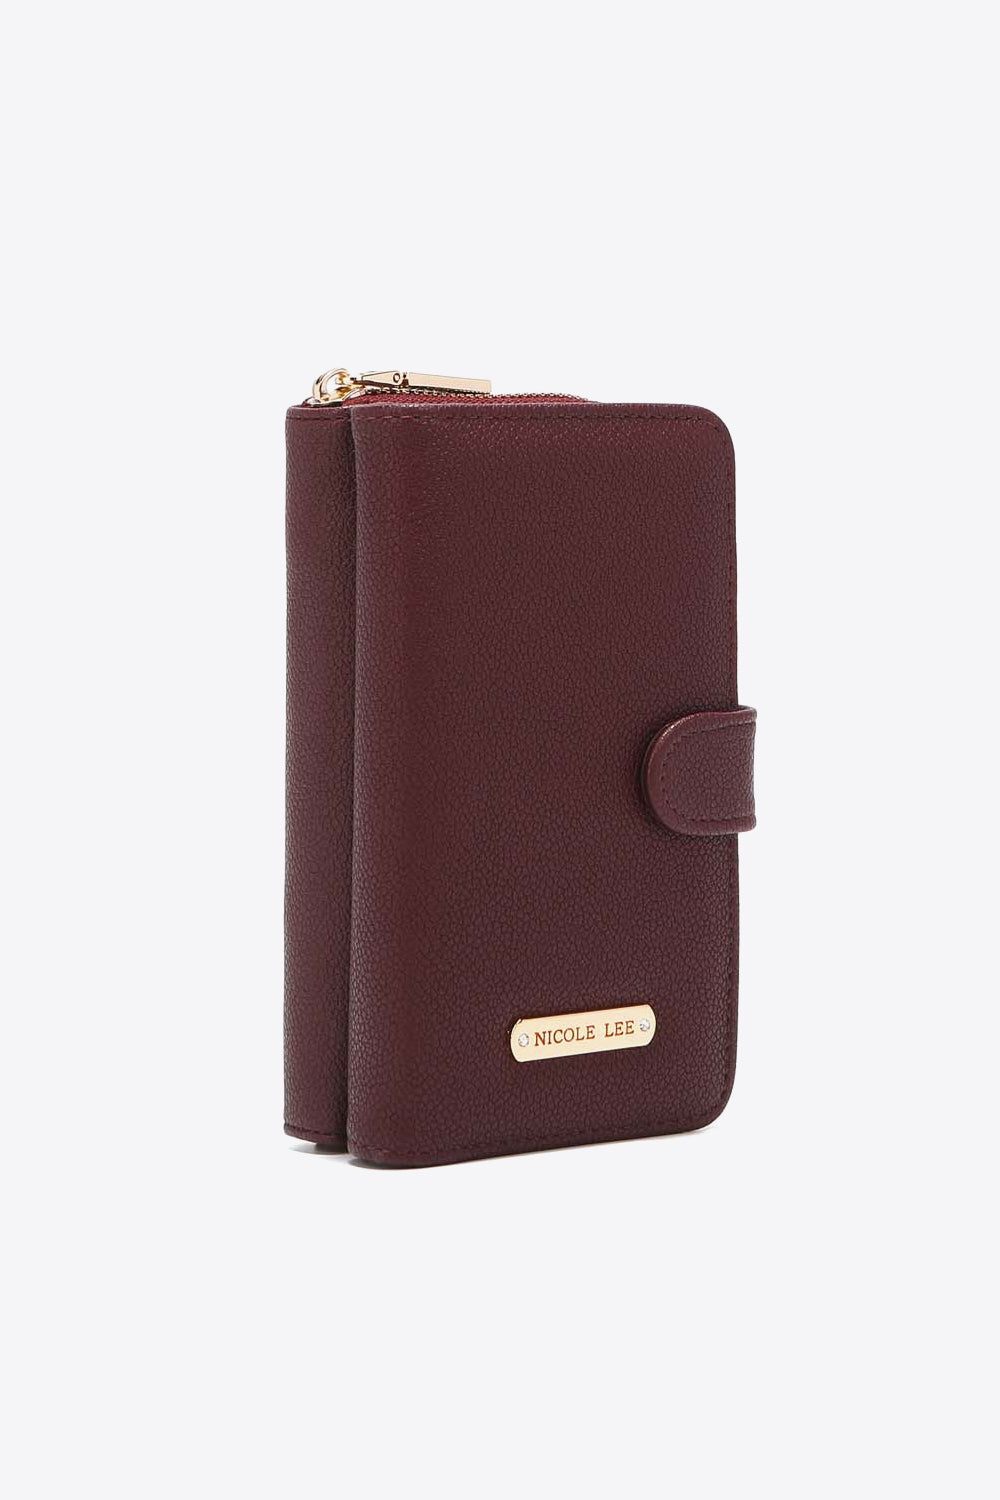 Nicole Lee USA Two-Piece Crossbody Phone Case Wallet free shipping -Oh Em Gee Boutique